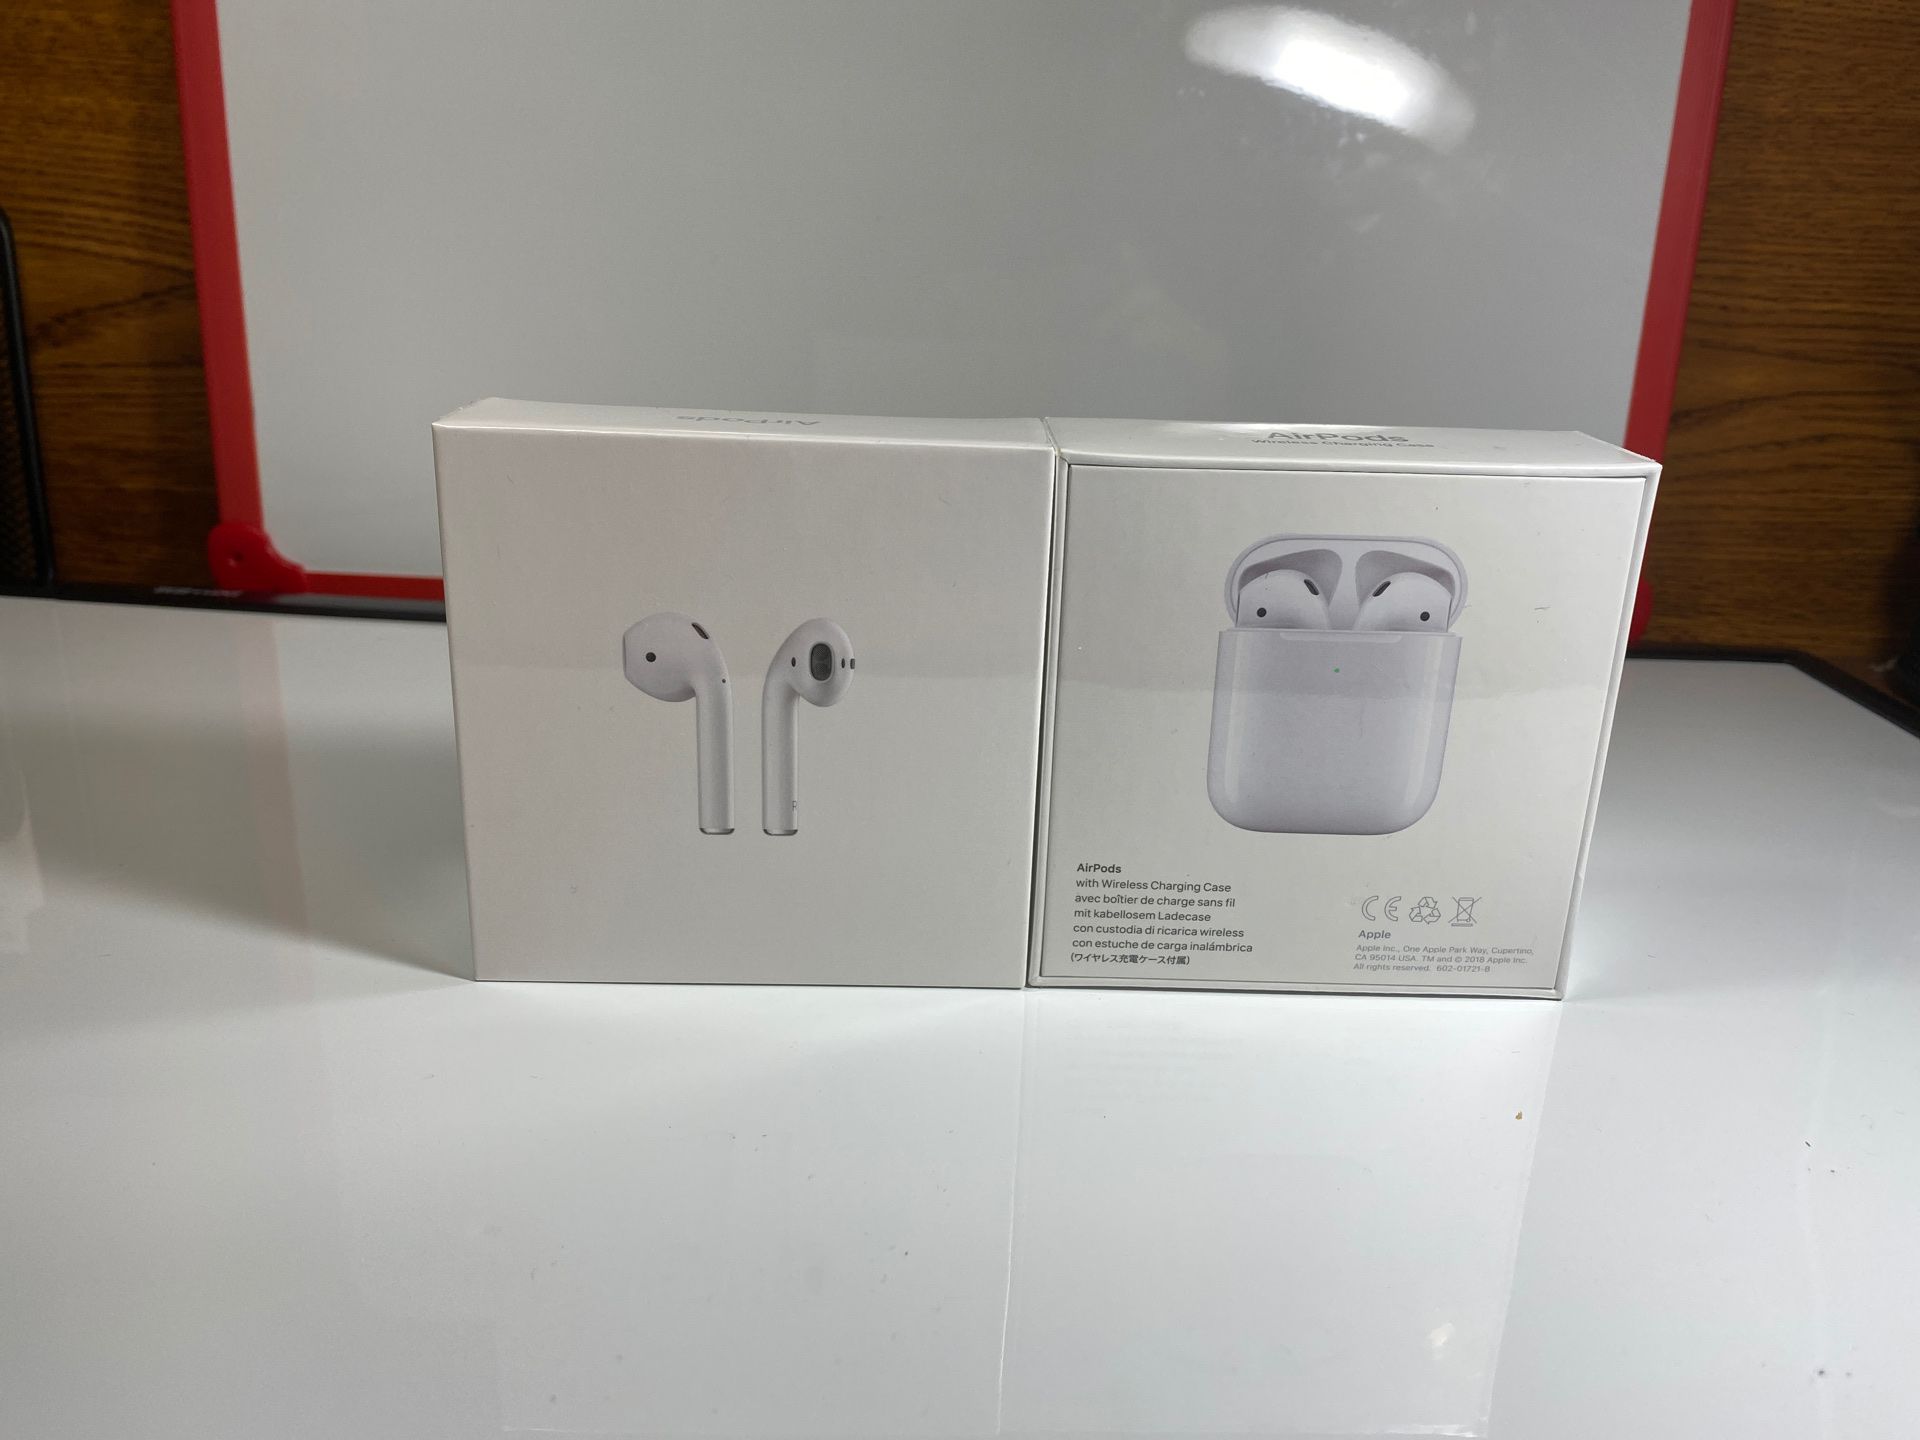 AirPods brand new seals